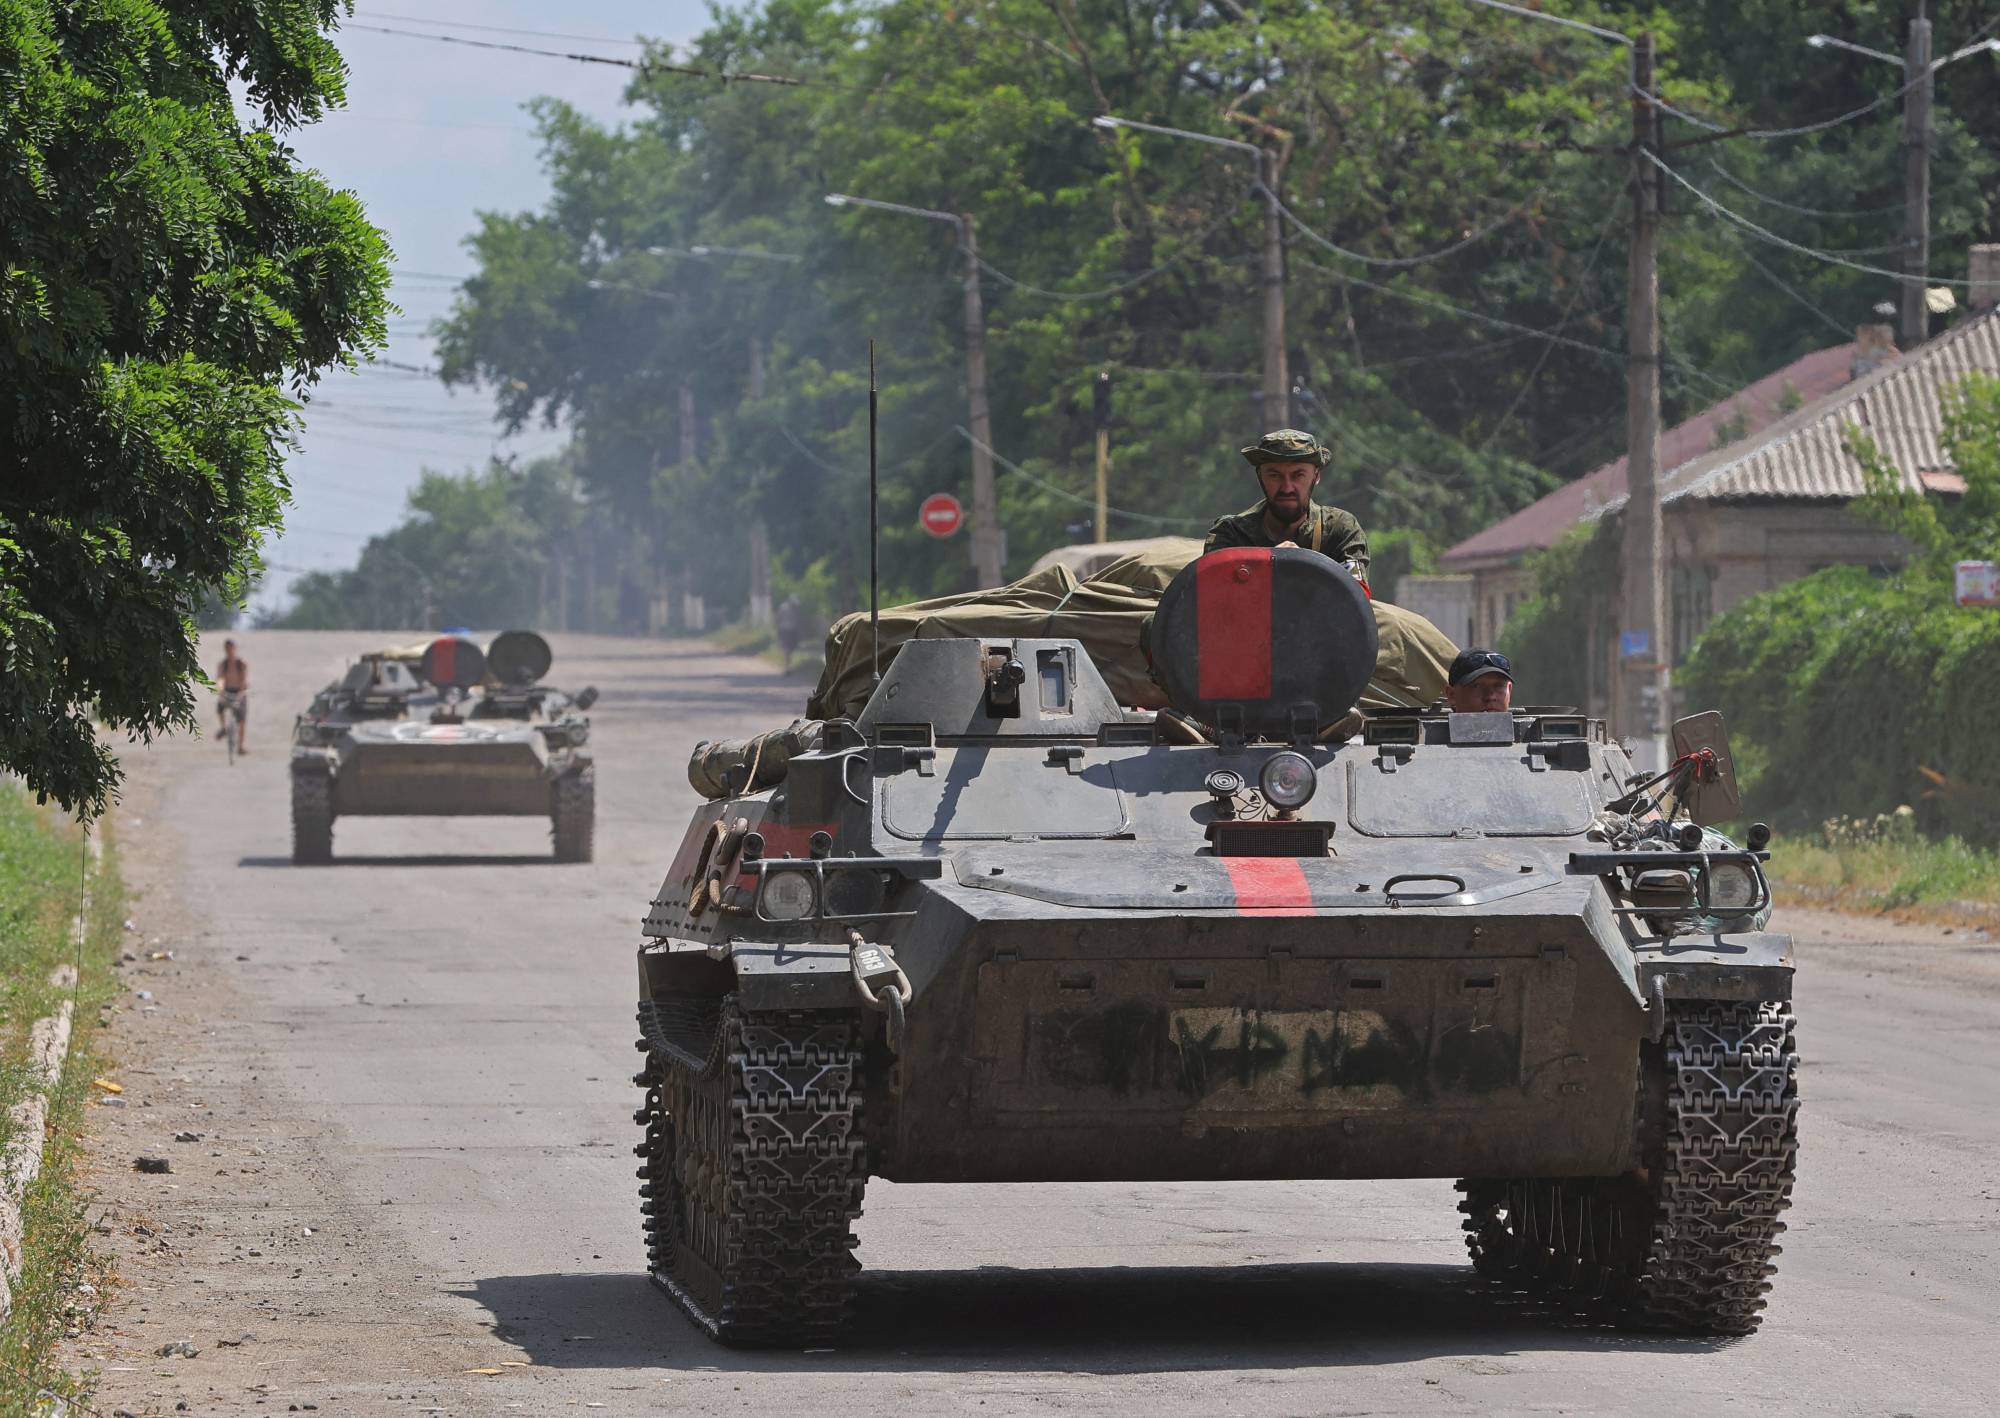 Pro-Russian forces ride an infantry fighting vehicle in the city of Lysychansk in Ukraine's Luhansk region on July 4. | REUTERS